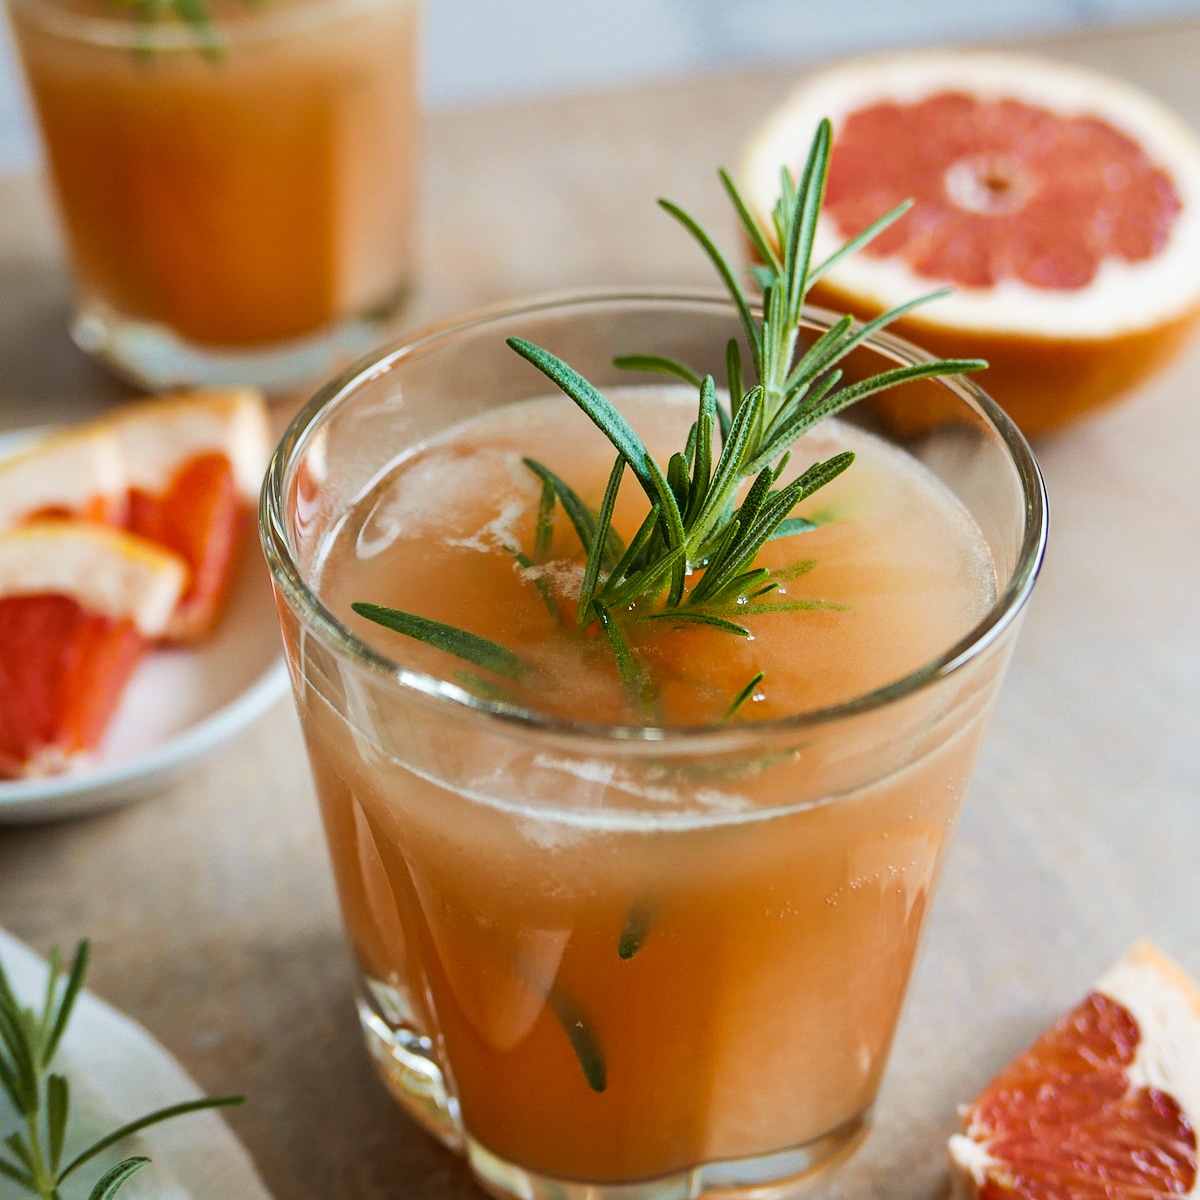 grapefruit vodka cocktail in a glass garnished with rosemary and slice of grapefruit.